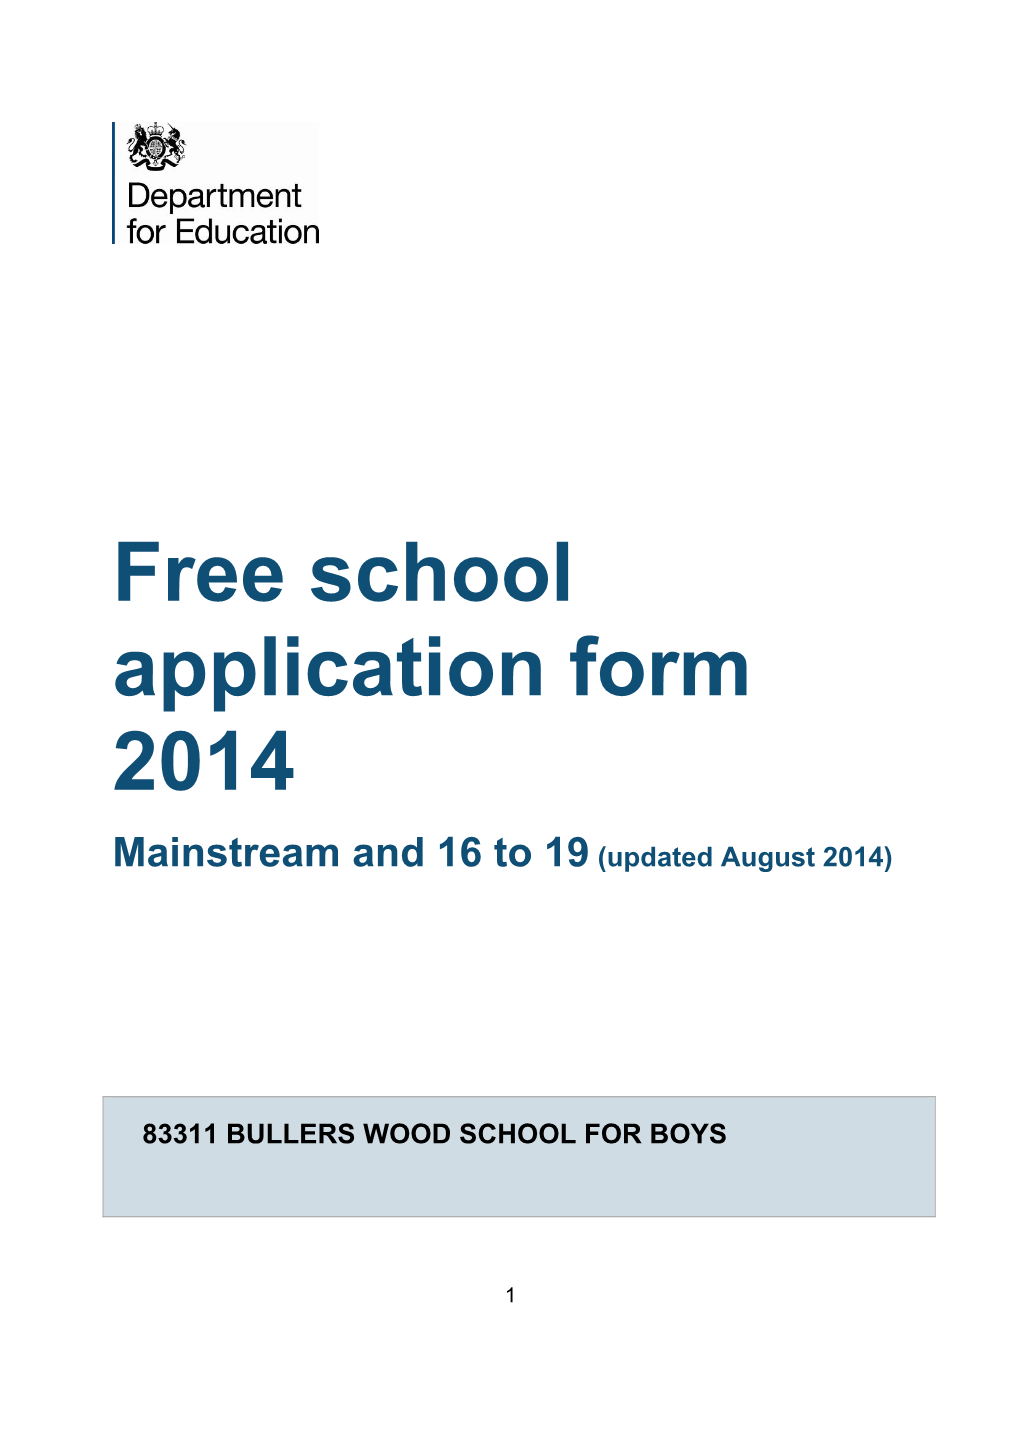 Free School Application Form 2014 Mainstream and 16 to 19 (Updated August 2014)